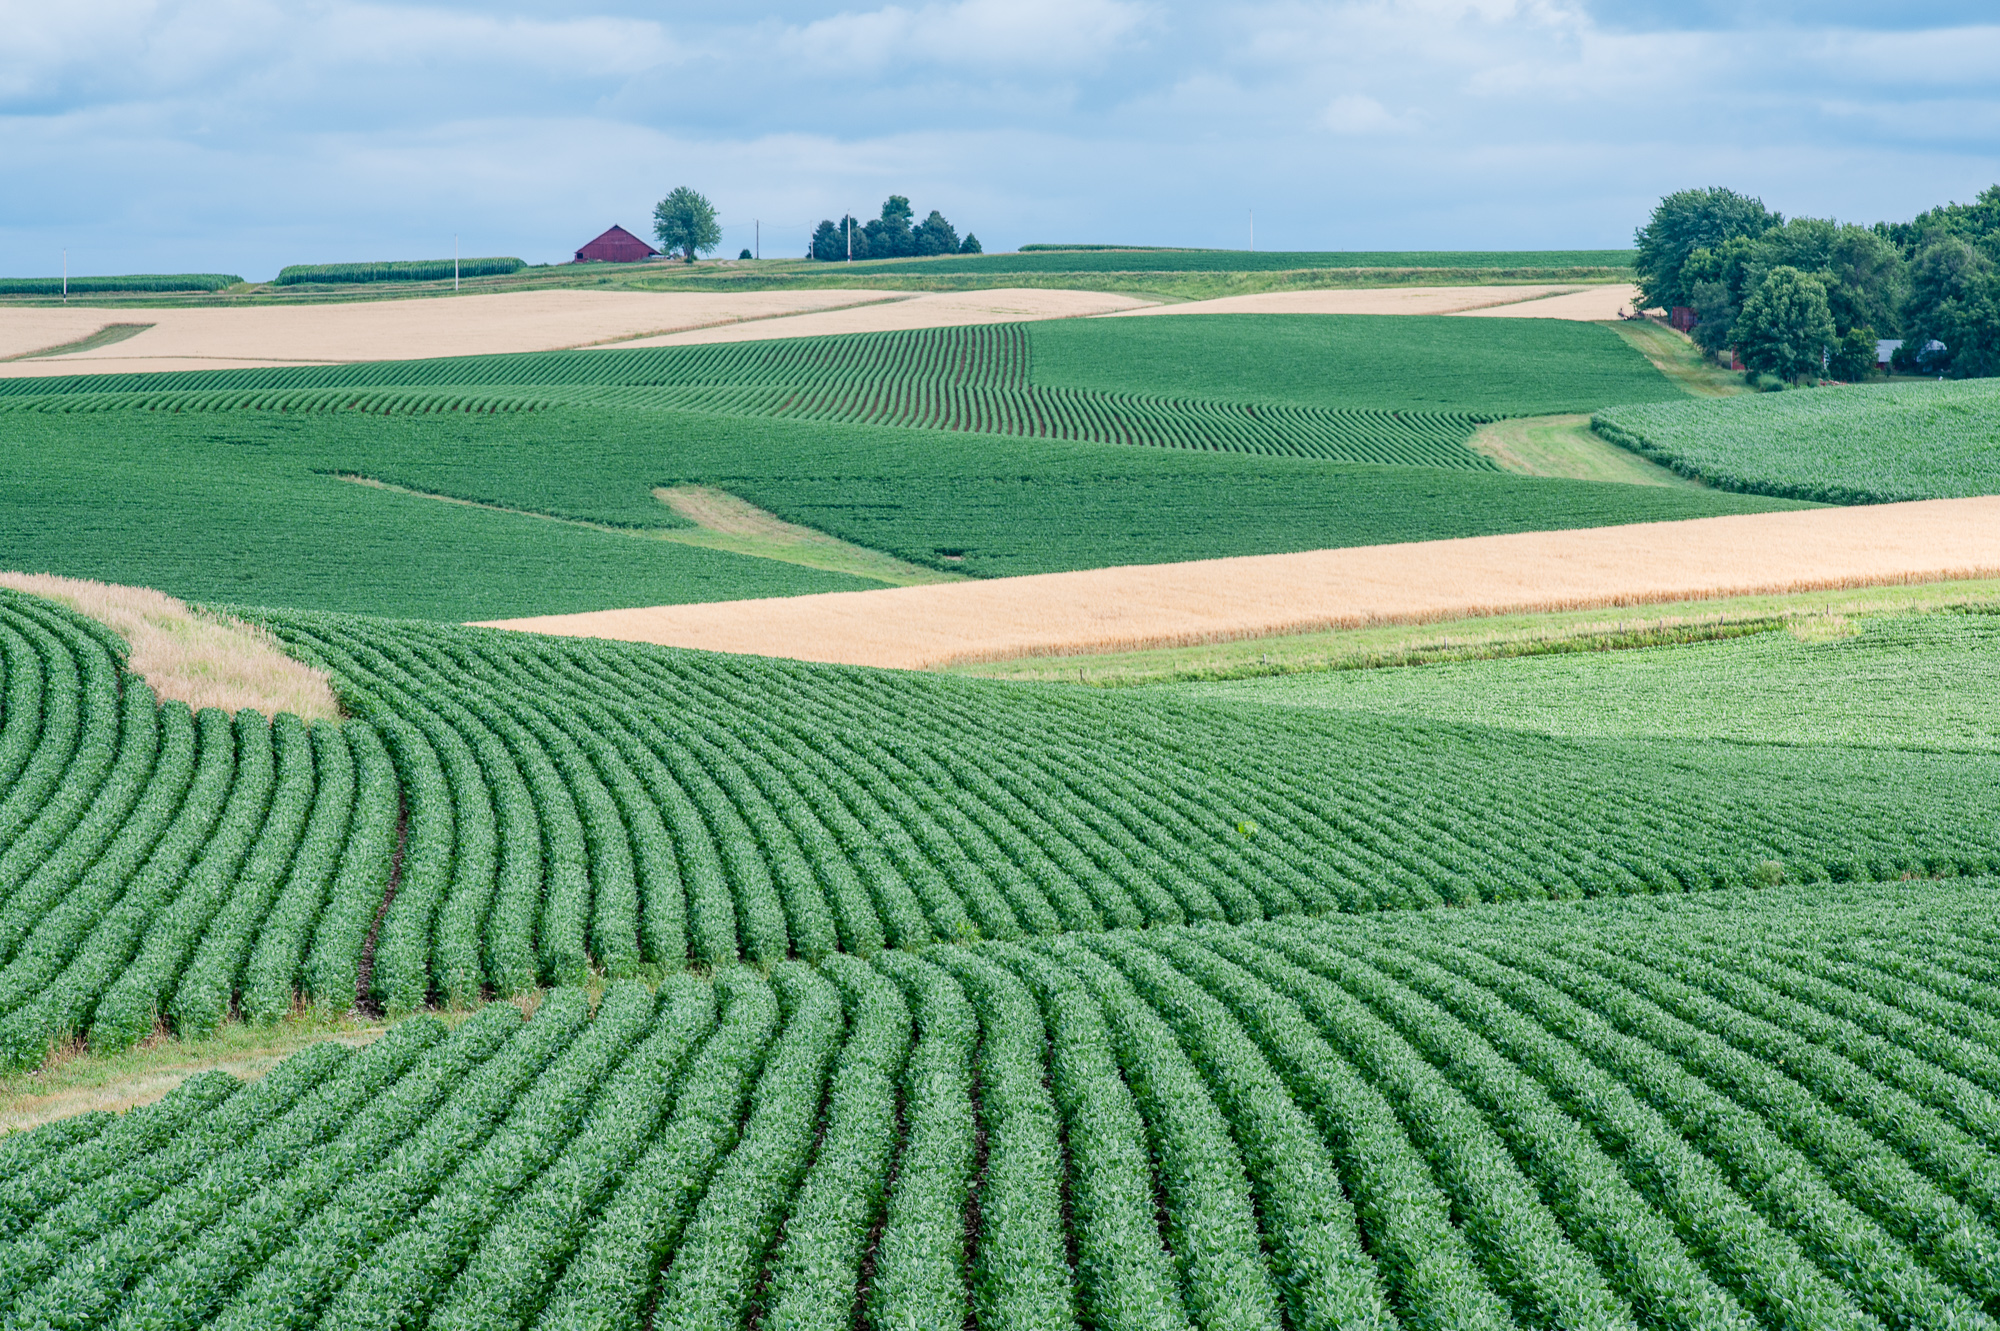 Rows of soybeans grow alongside conservation practices